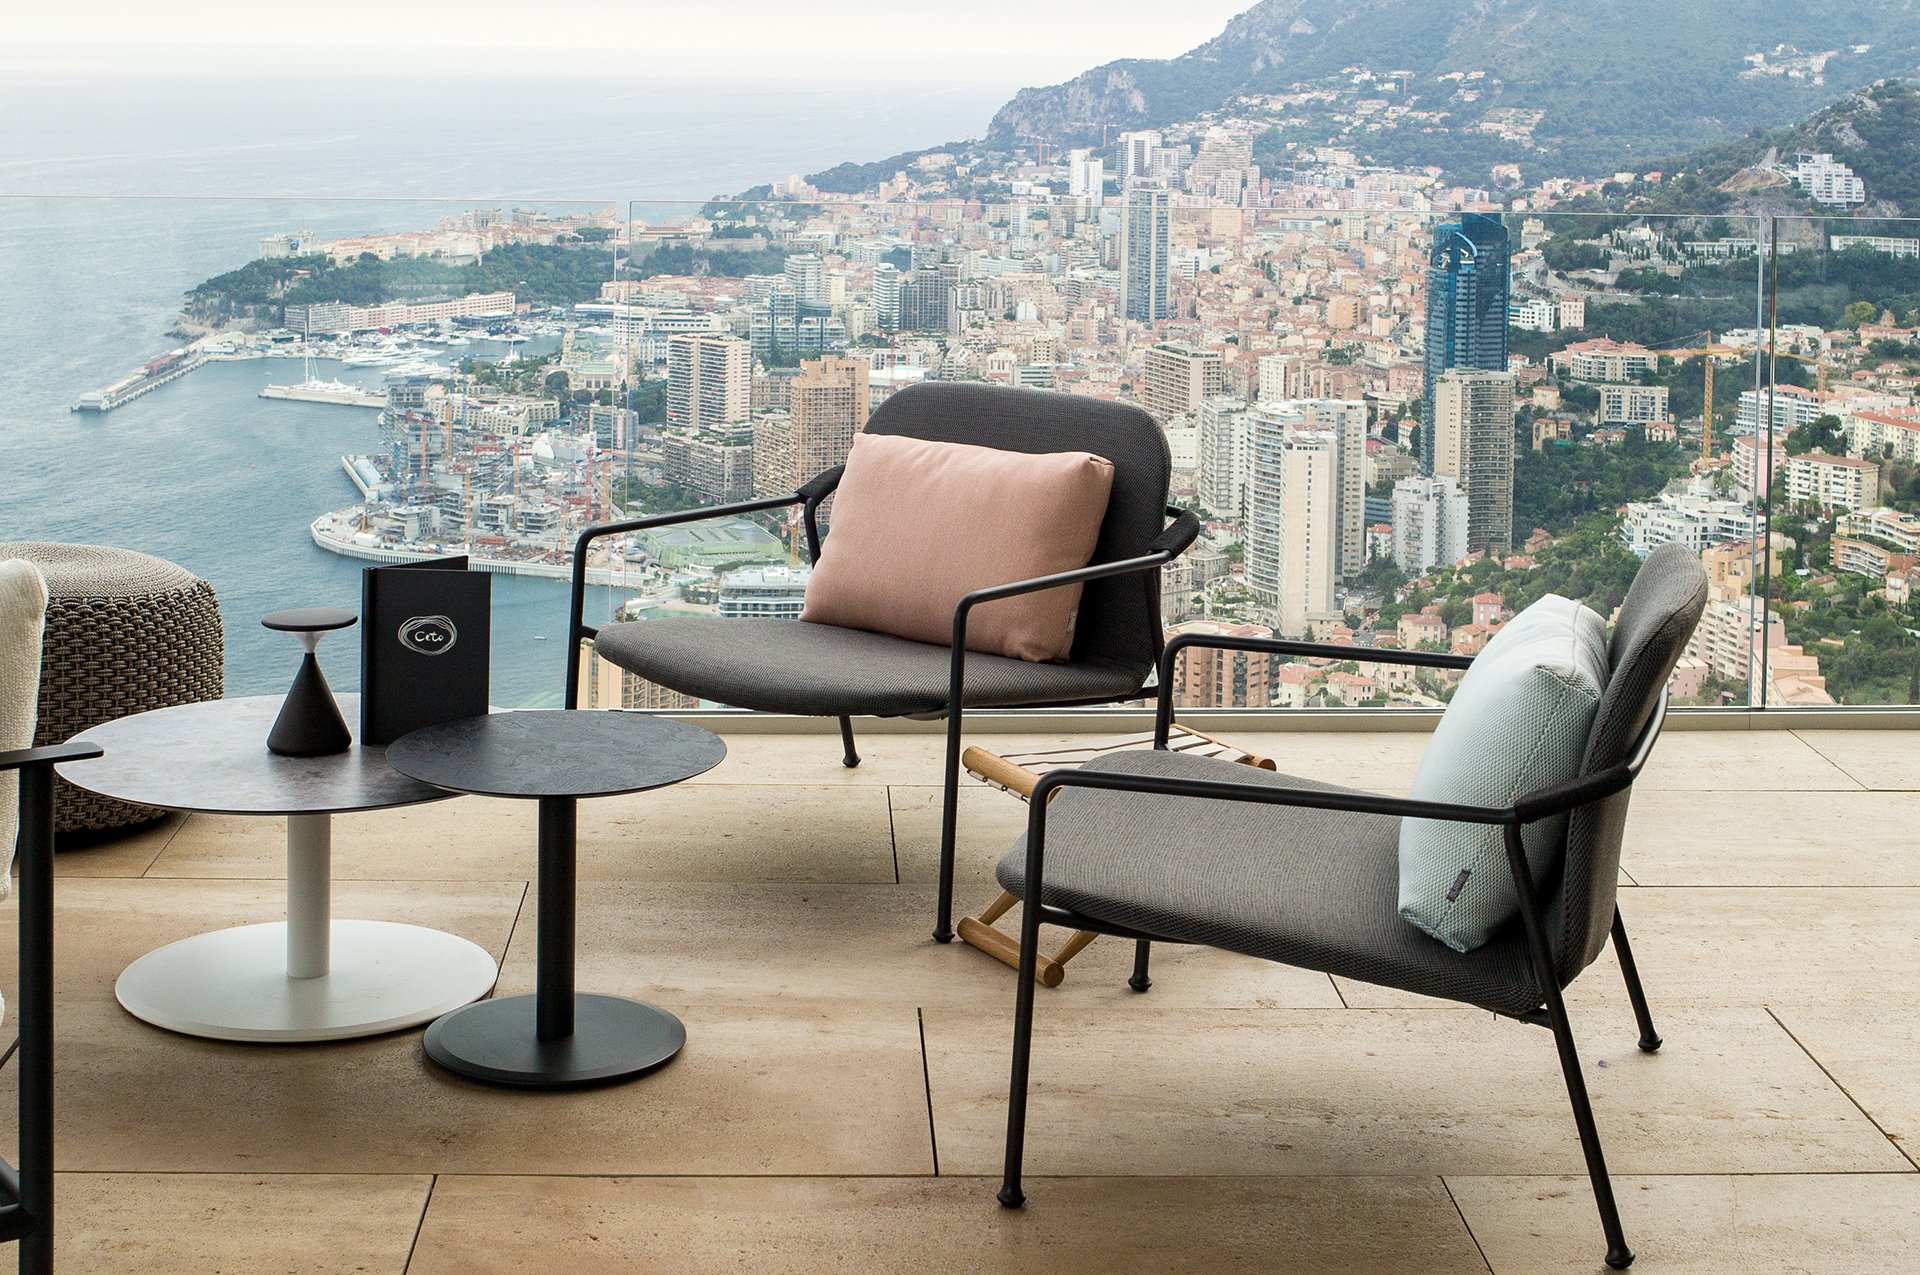 Bar Ceto at The Maybourne Riviera - two lounge chairs and two round coffee tables on the terrace with a view of Monaco.